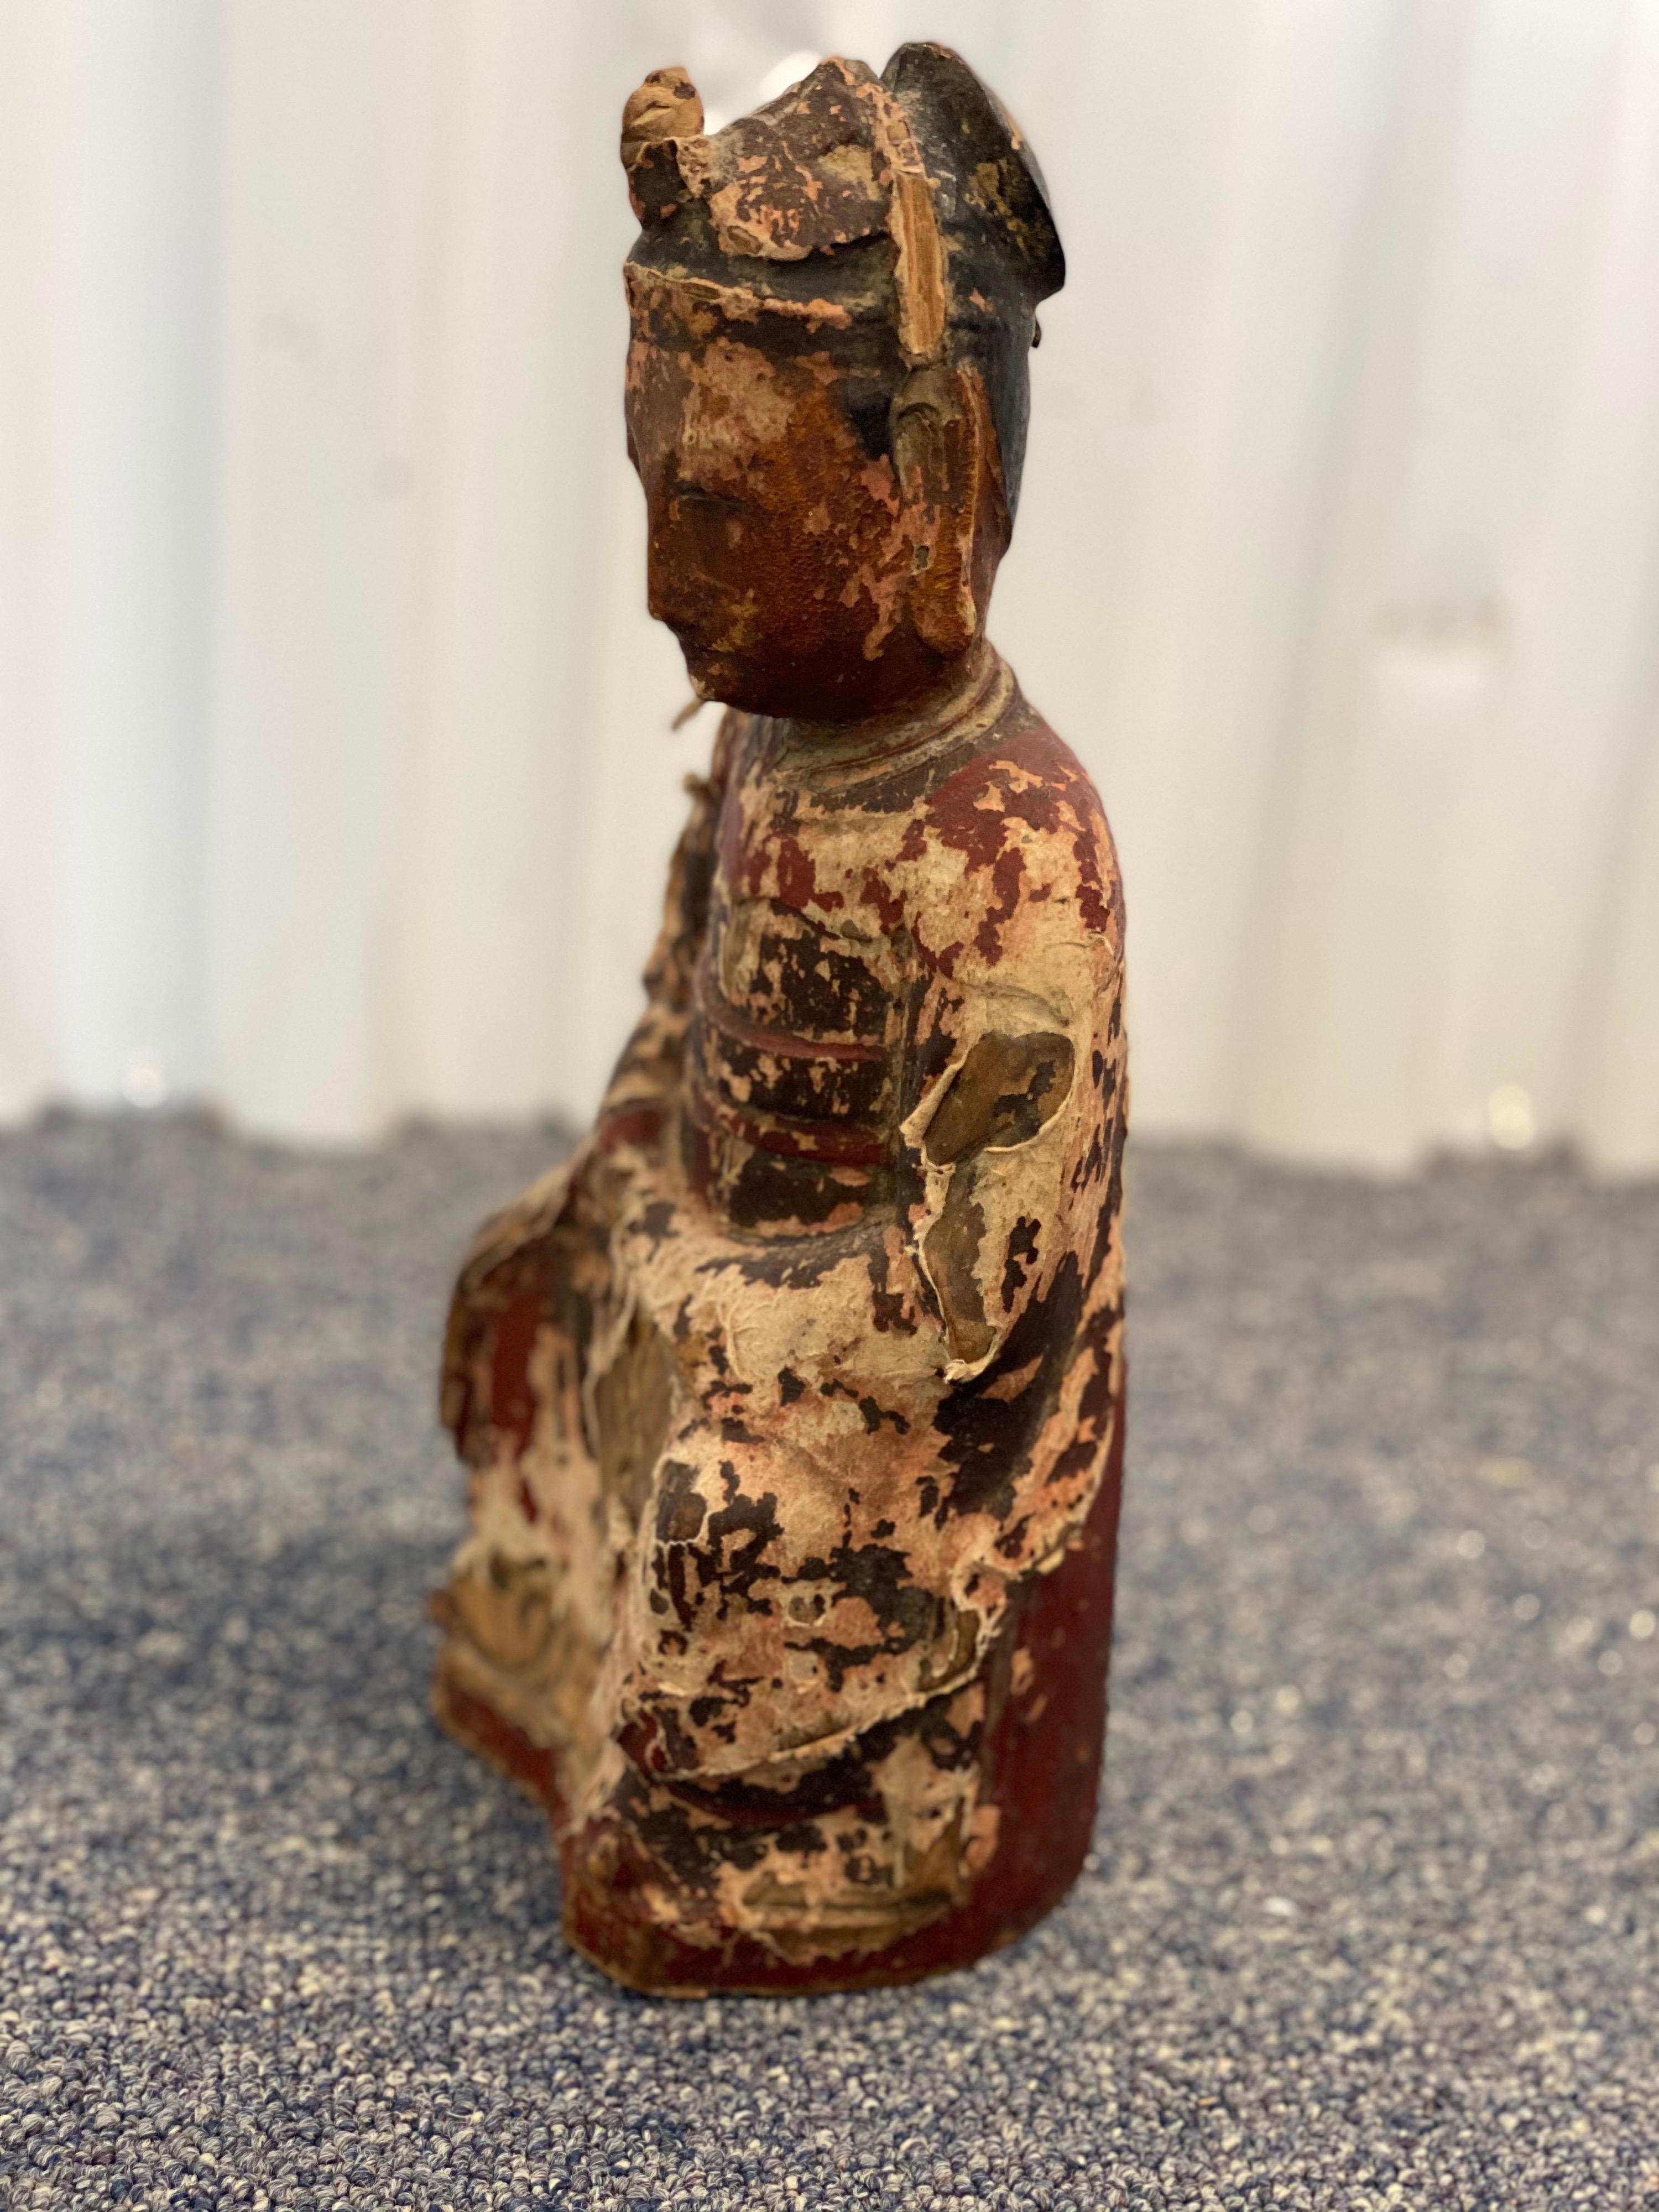 19th century Chinese carved Ancestor figure
This carved figure bears the likeness of one of its original owner's important forebears. A carved slot in the figures back was once a small compartment for written prayers. 

Condition:
No structural